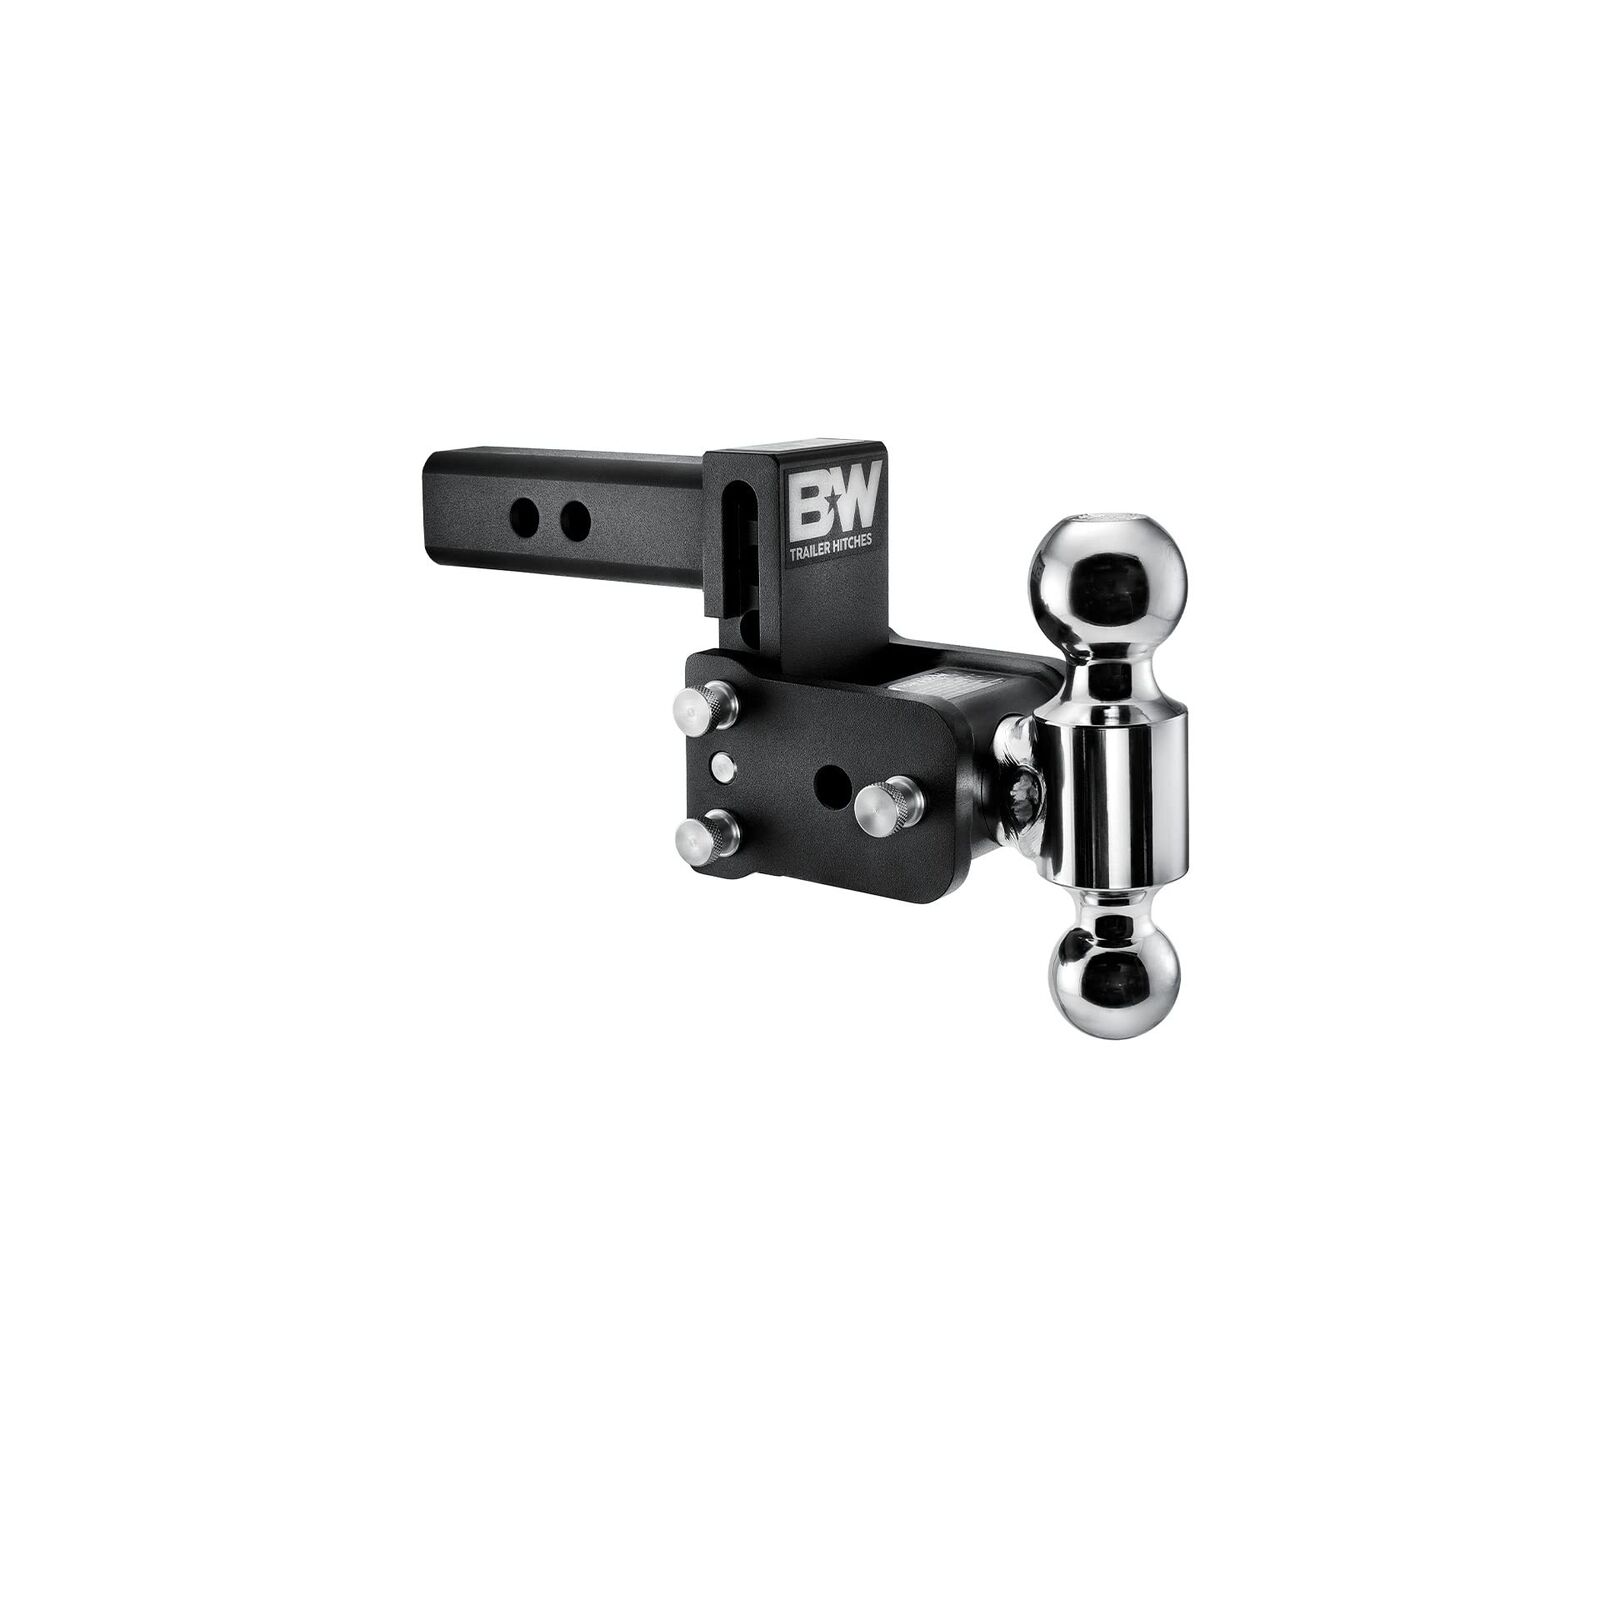 B&W Trailer Hitches Tow & Stow Adjustable Trailer Hitch Ball Mount - Fits 2\